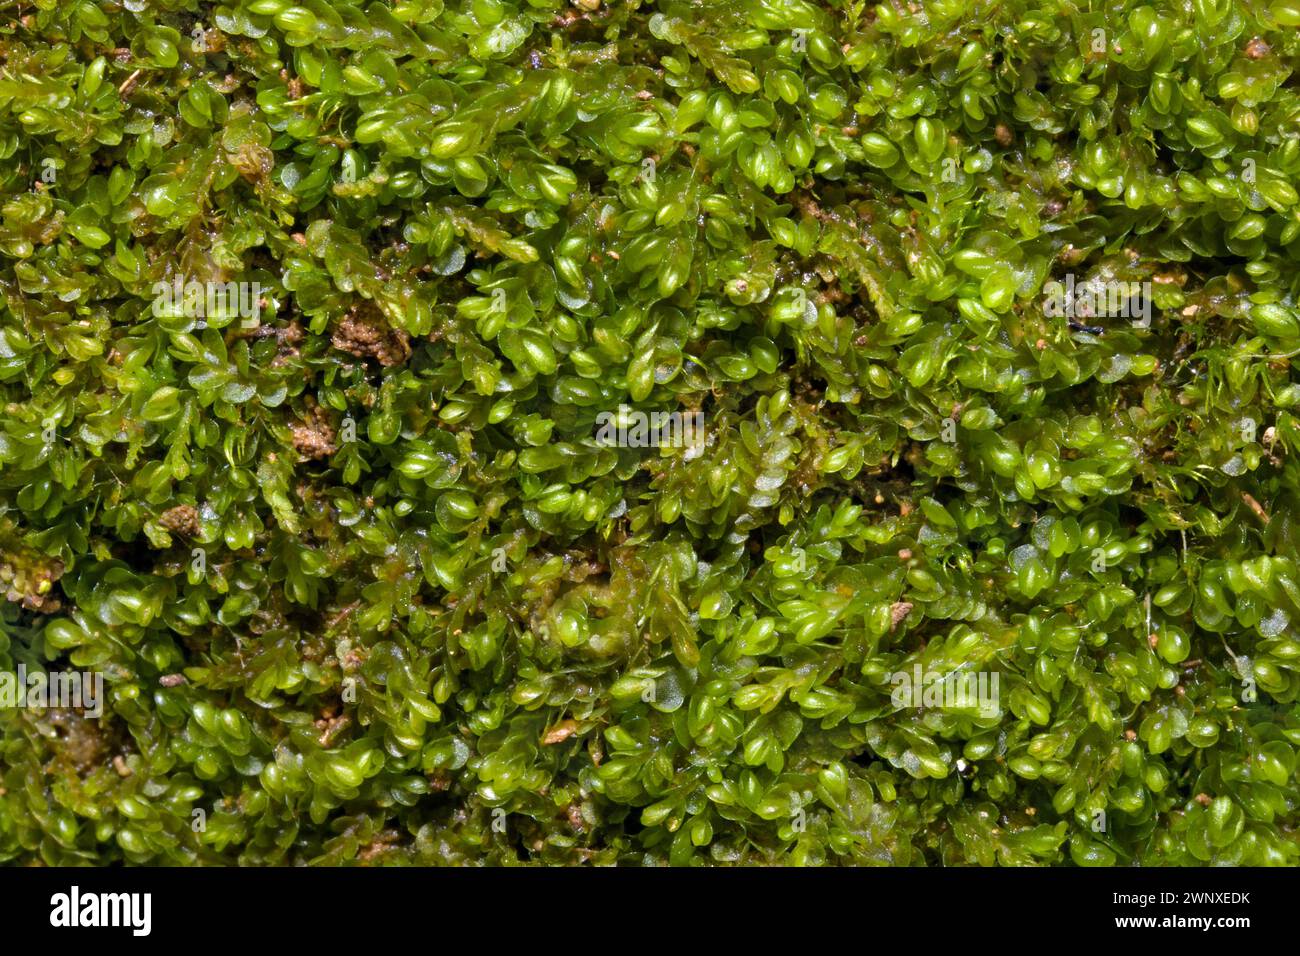 Solenostoma gracillimum (Crenulated Flapwort) is a liverwort found on base-poor soil and paths. It's widespread in the Northern Hemisphere. Stock Photo